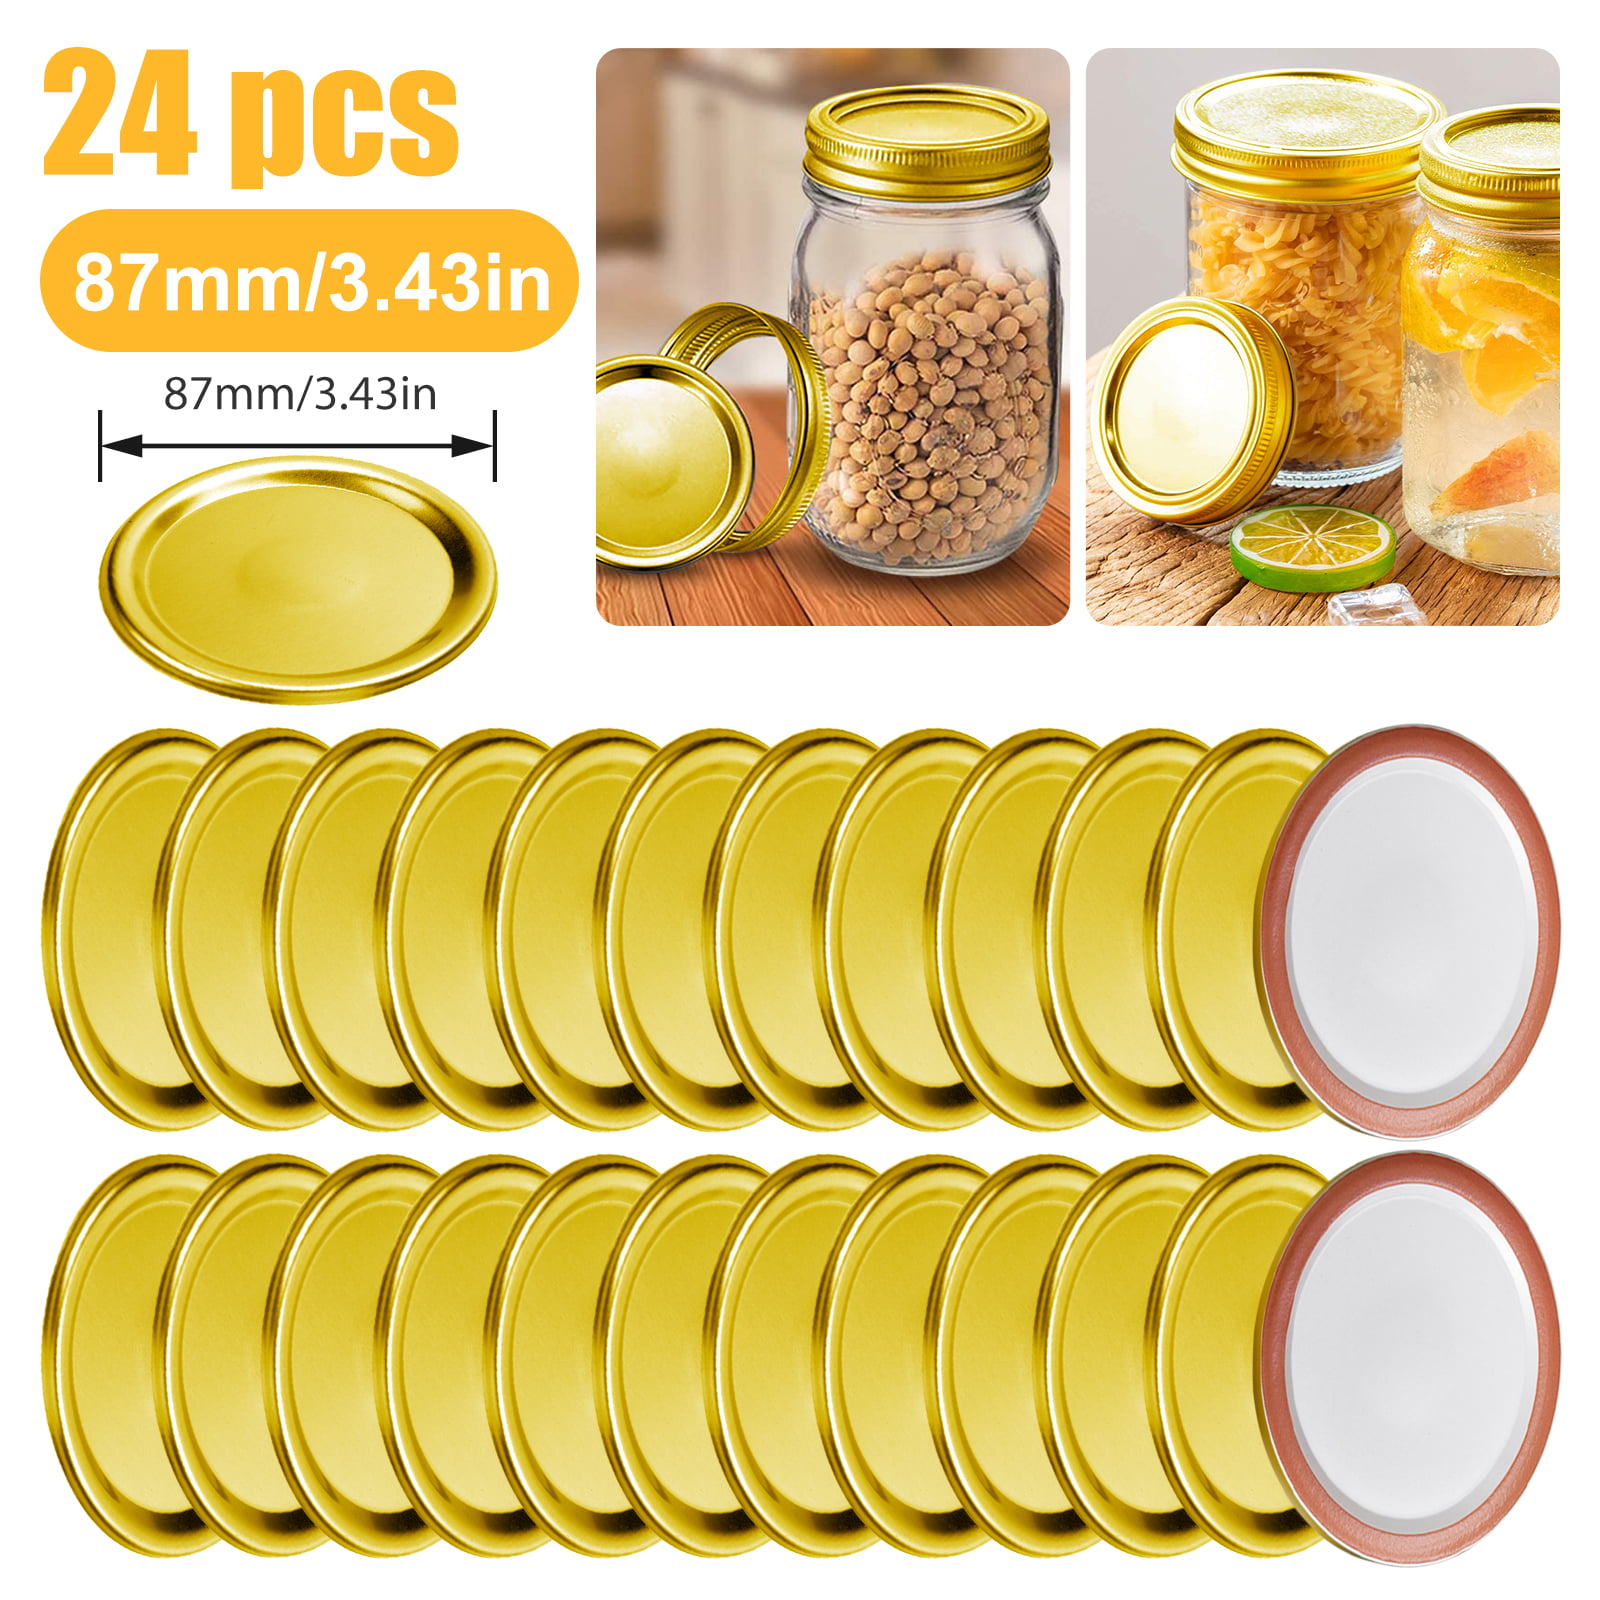 AIEVE Mason Jar Lids Jars not Included 6 Pack Wide Mouth Mason Jar Lids Reusable Canning Lids with Flip Top Lid Leak-Proof Seal for Ball Kerr Mason Jars Canning Jars to Pour Milk Coffee Tea 